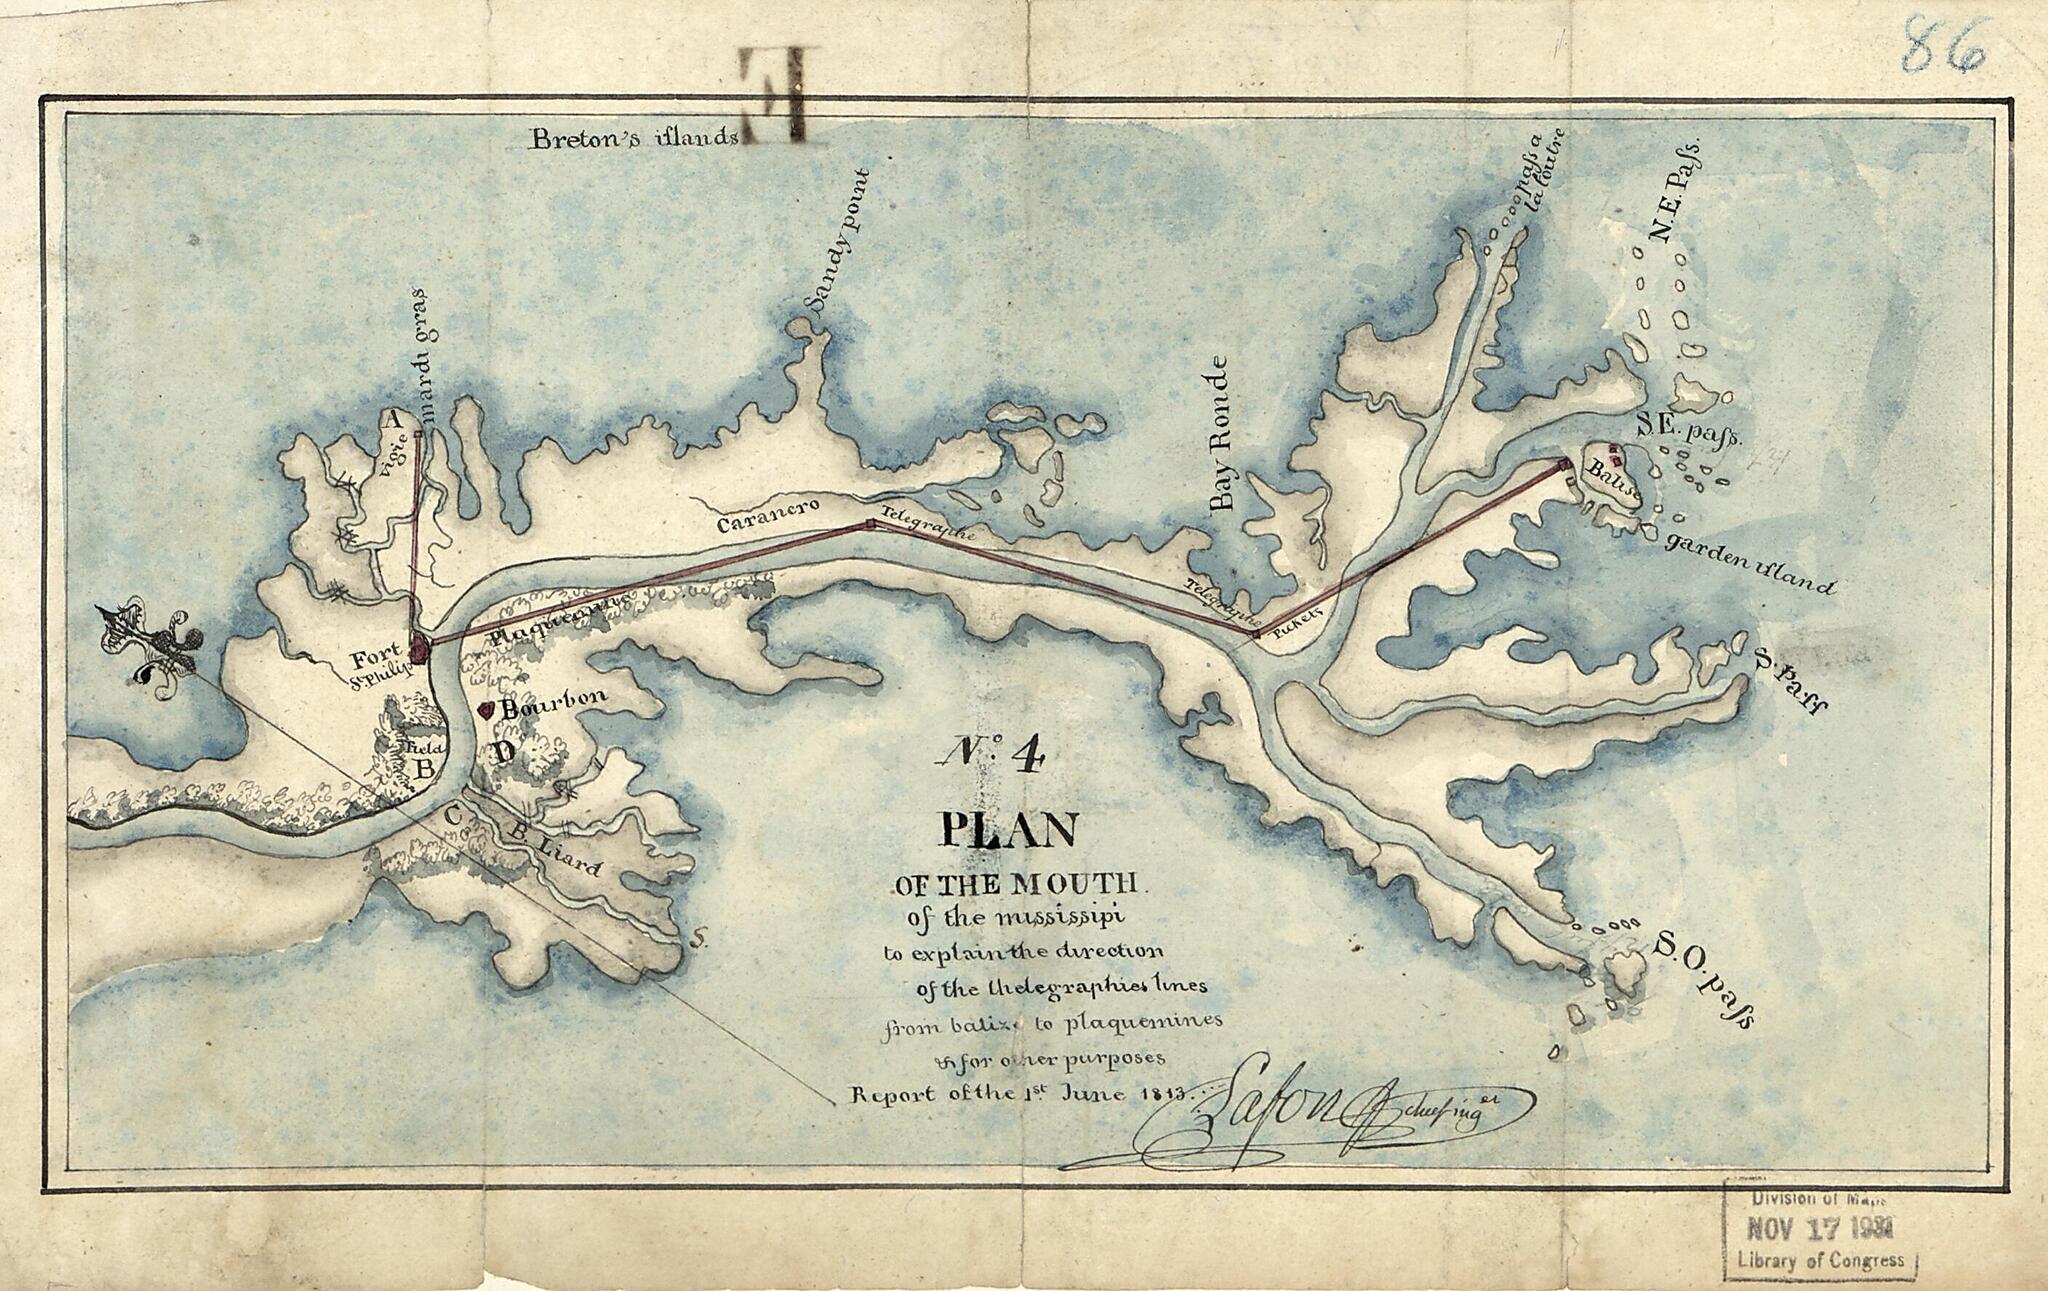 This old map of Plan of the Mouth of the Mississipi to Explain the Direction of the Thelegraphies Lines from Balize to Plaquemines &amp; for Other Puposes : No. 4, Report of the 1st June from 1813 was created by Barthélémy Lafon,  United States. War Depart